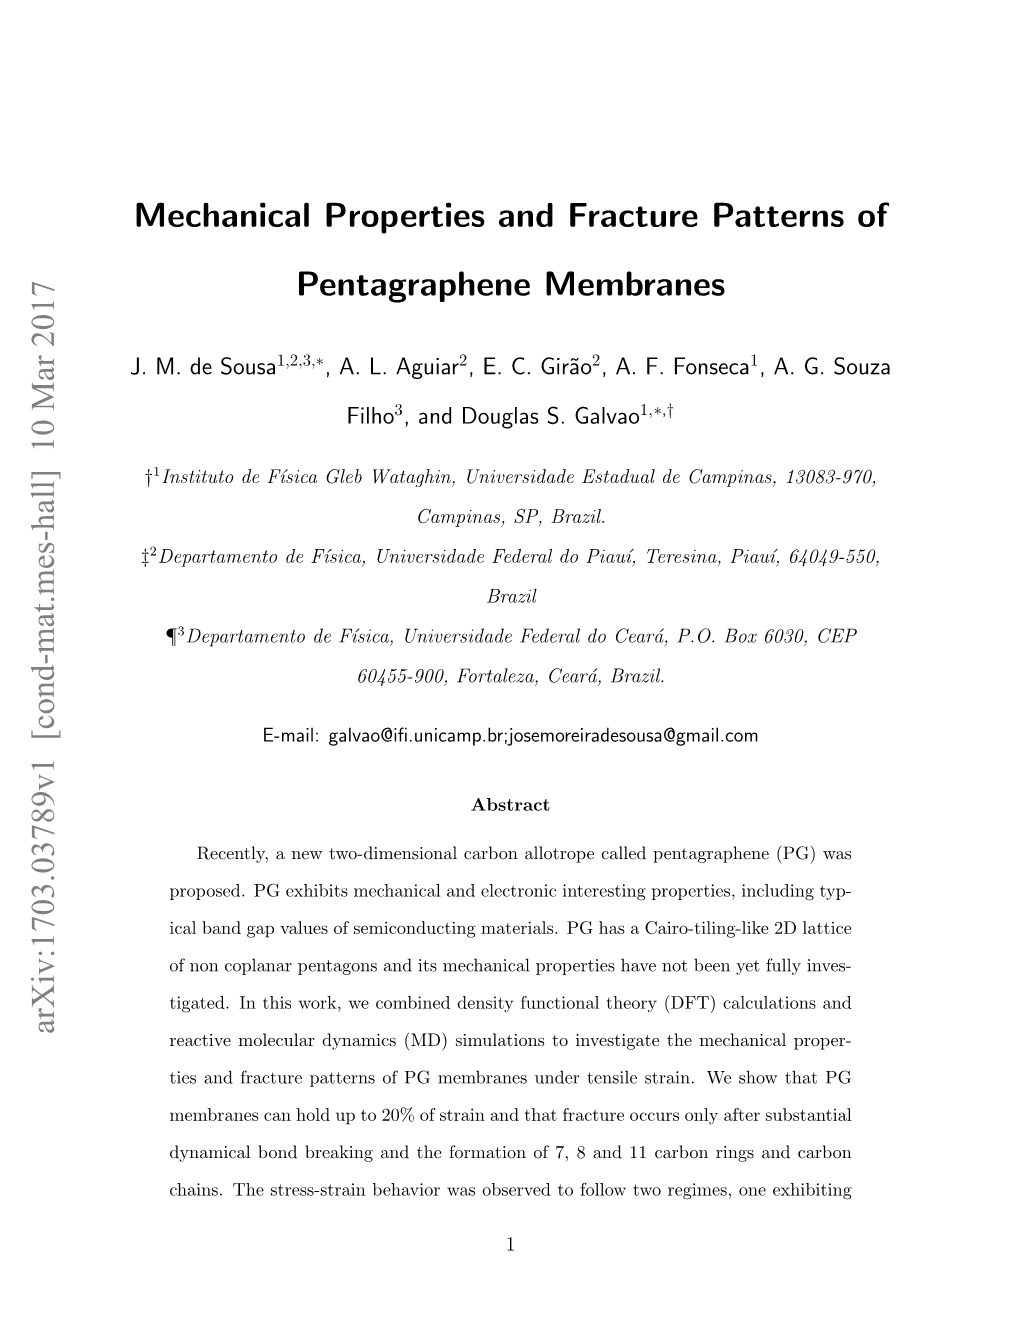 Mechanical Properties and Fracture Patterns of Pentagraphene Membranes